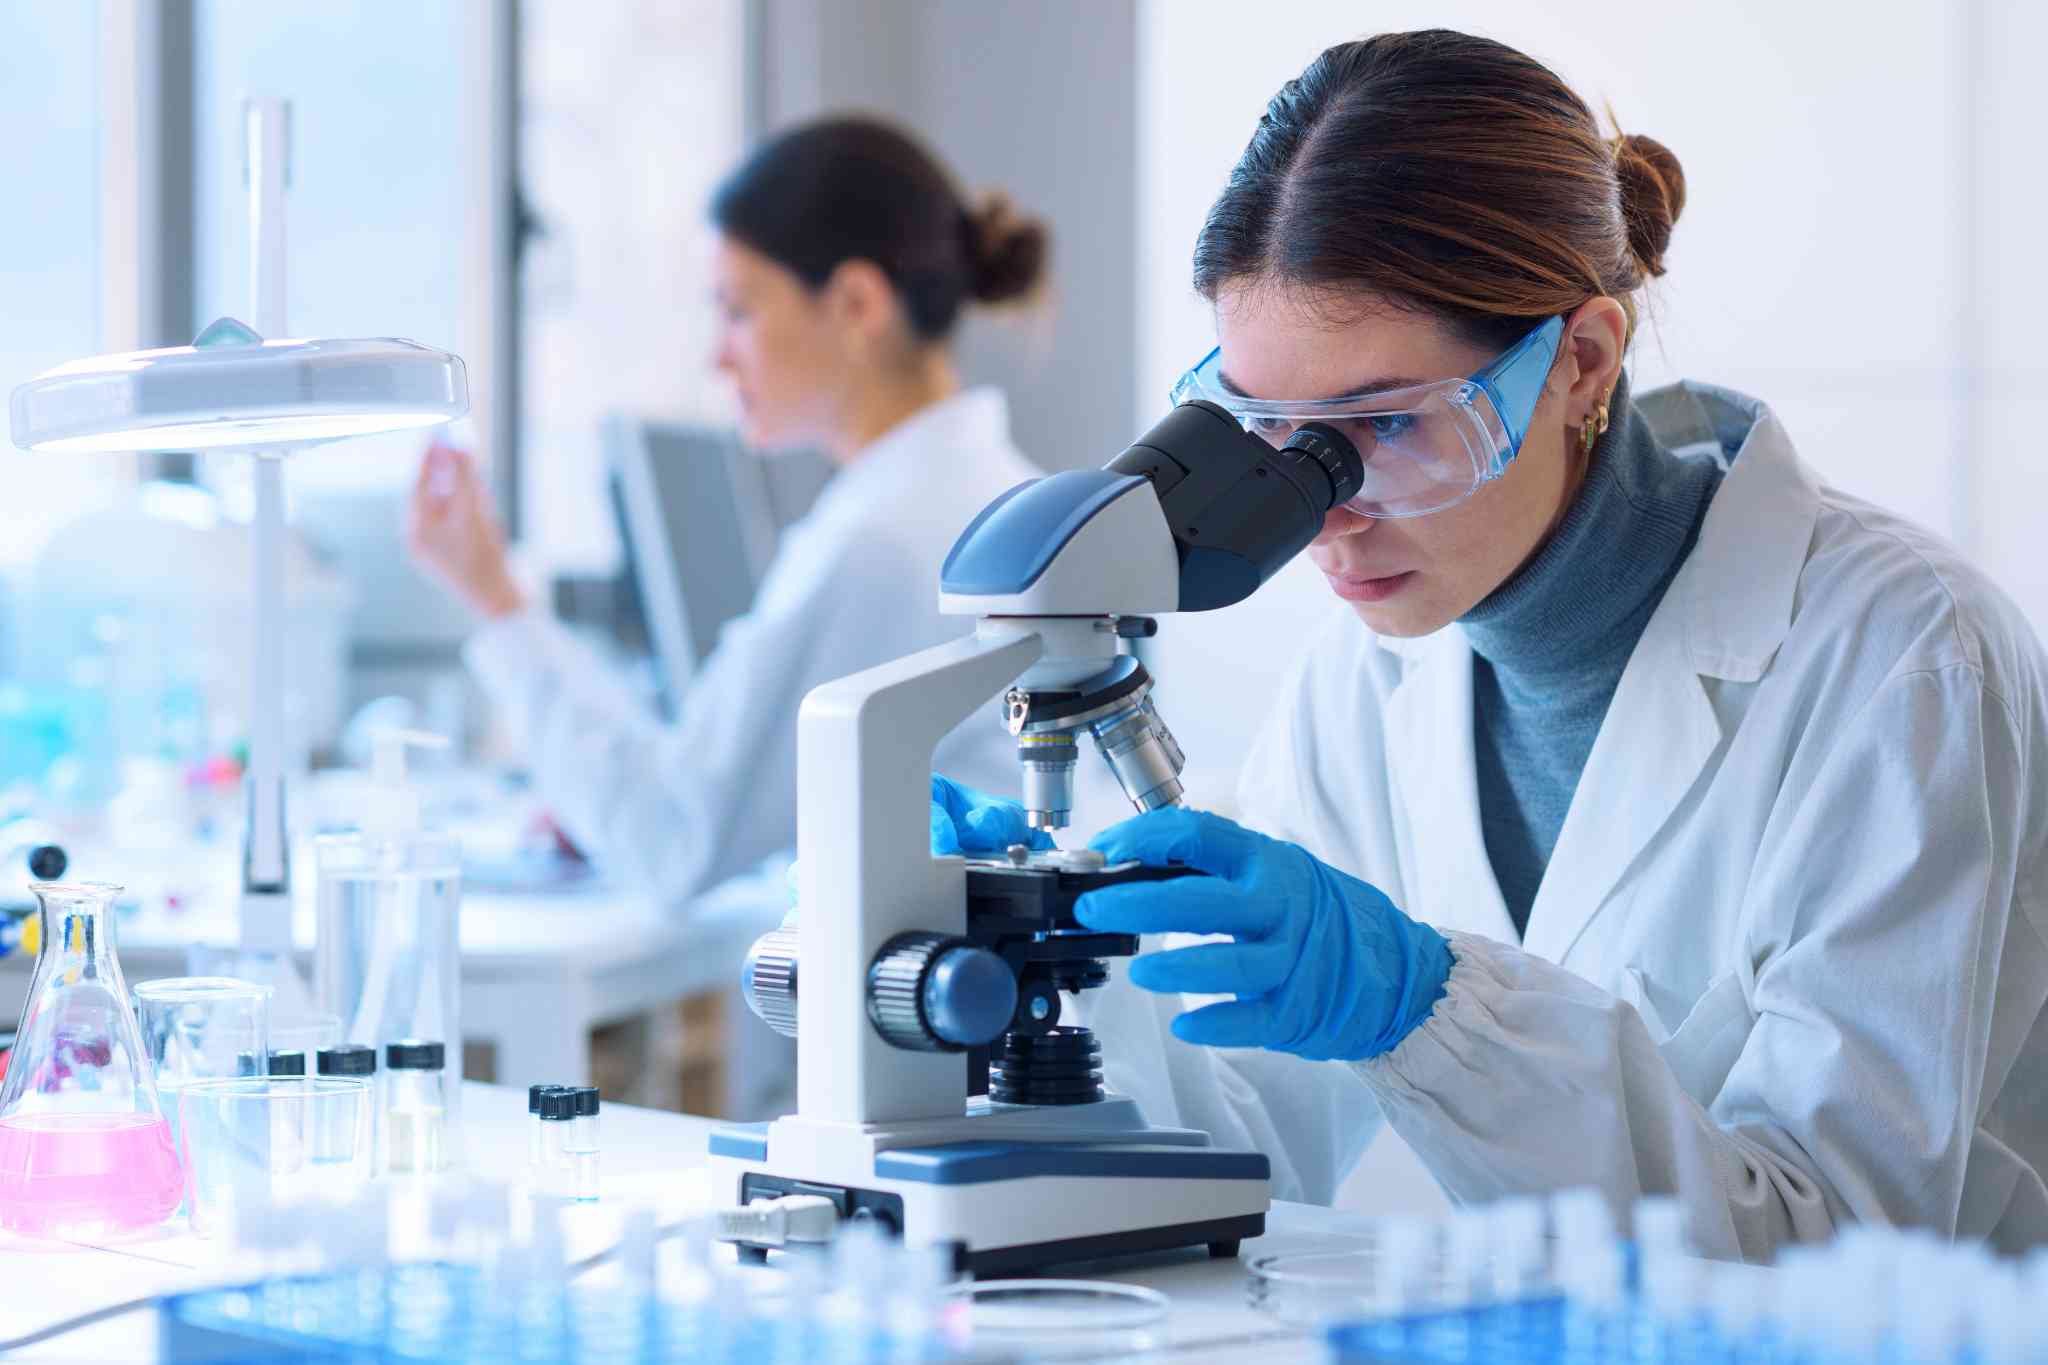 How The SBA Standards For SMBs Impact Life Science and BioTech - KatzAbosch